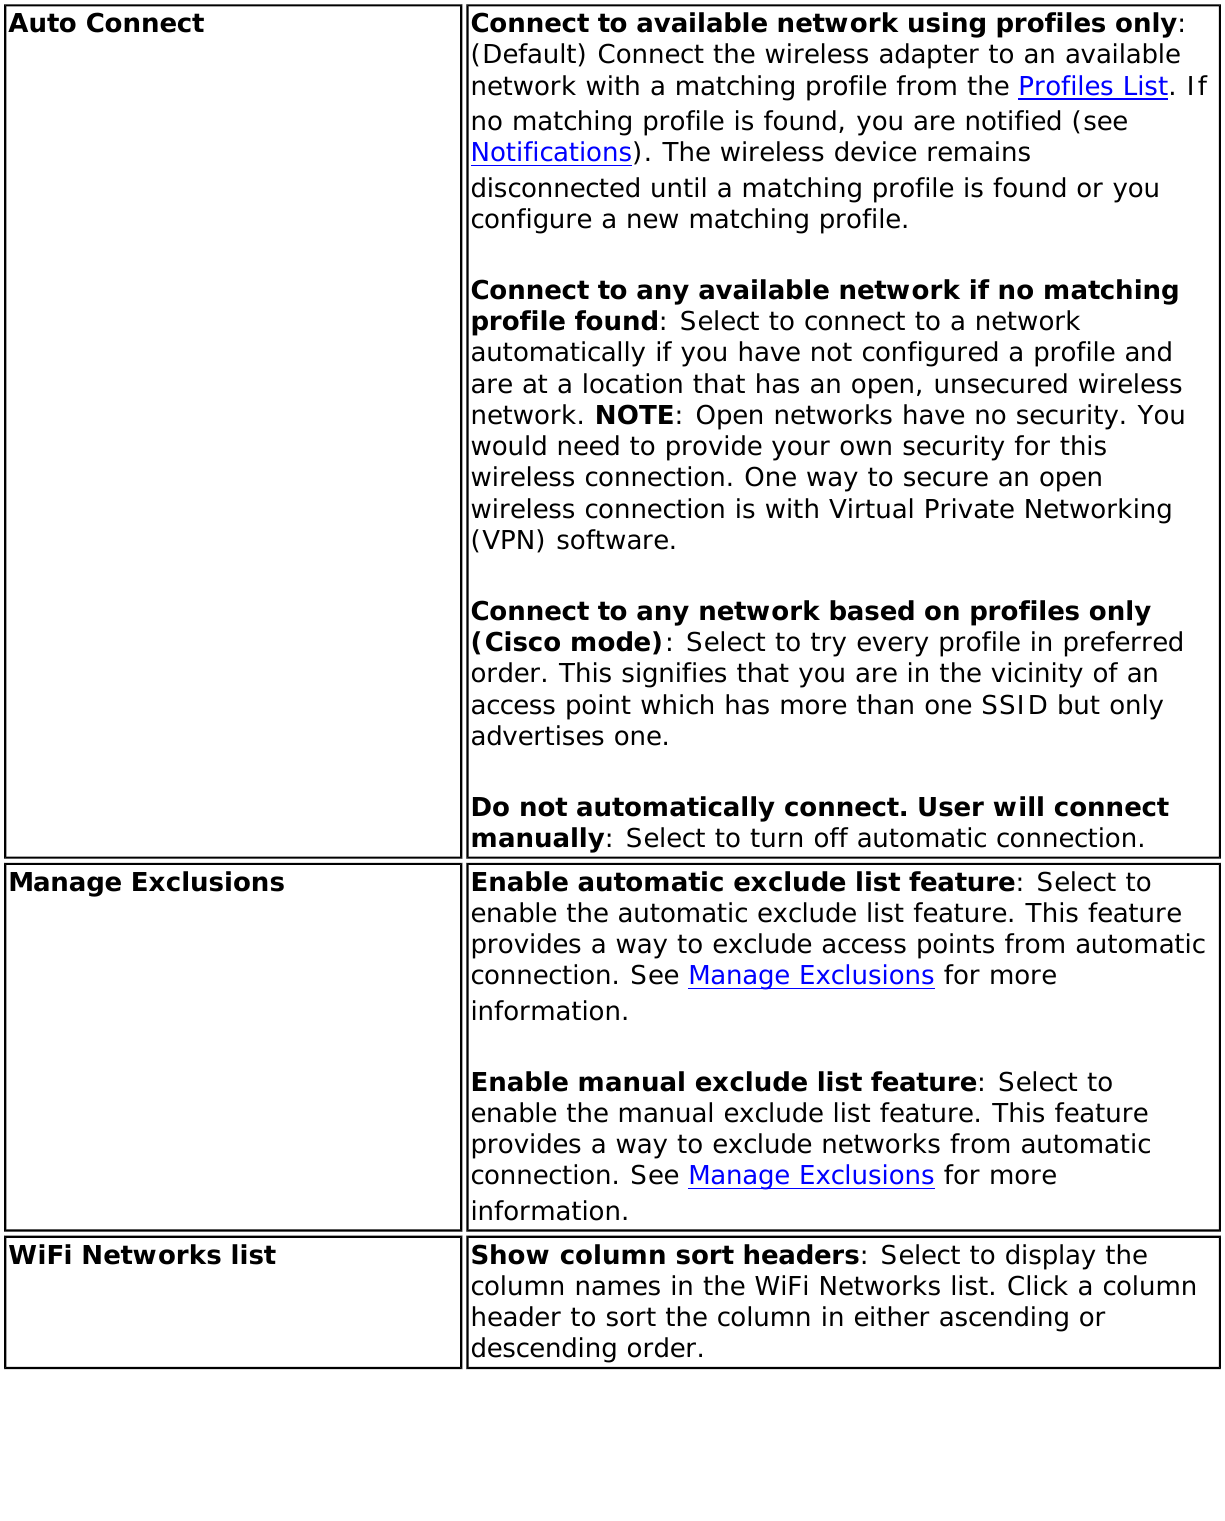 Auto Connect Connect to available network using profiles only: (Default) Connect the wireless adapter to an available network with a matching profile from the Profiles List. If no matching profile is found, you are notified (see Notifications). The wireless device remains disconnected until a matching profile is found or you configure a new matching profile.Connect to any available network if no matching profile found: Select to connect to a network automatically if you have not configured a profile and are at a location that has an open, unsecured wireless network. NOTE: Open networks have no security. You would need to provide your own security for this wireless connection. One way to secure an open wireless connection is with Virtual Private Networking (VPN) software.Connect to any network based on profiles only (Cisco mode): Select to try every profile in preferred order. This signifies that you are in the vicinity of an access point which has more than one SSID but only advertises one.Do not automatically connect. User will connect manually: Select to turn off automatic connection. Manage Exclusions Enable automatic exclude list feature: Select to enable the automatic exclude list feature. This feature provides a way to exclude access points from automatic connection. See Manage Exclusions for more information.Enable manual exclude list feature: Select to enable the manual exclude list feature. This feature provides a way to exclude networks from automatic connection. See Manage Exclusions for more information.WiFi Networks list Show column sort headers: Select to display the column names in the WiFi Networks list. Click a column header to sort the column in either ascending or descending order.